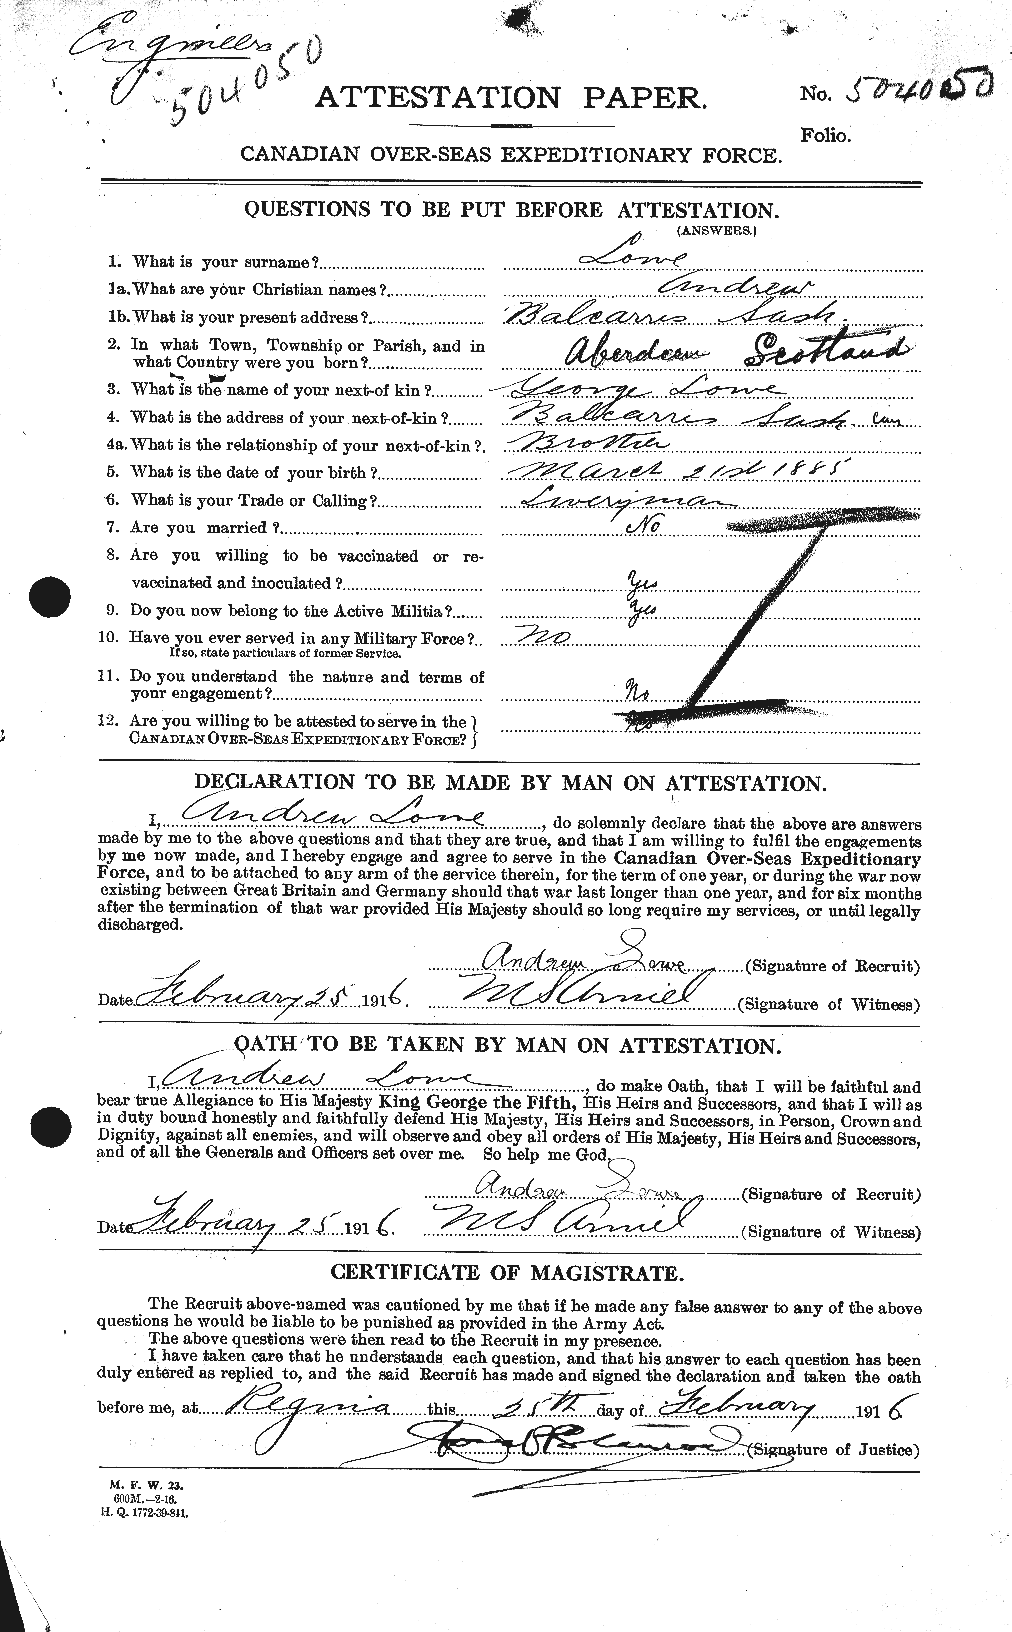 Personnel Records of the First World War - CEF 469497a